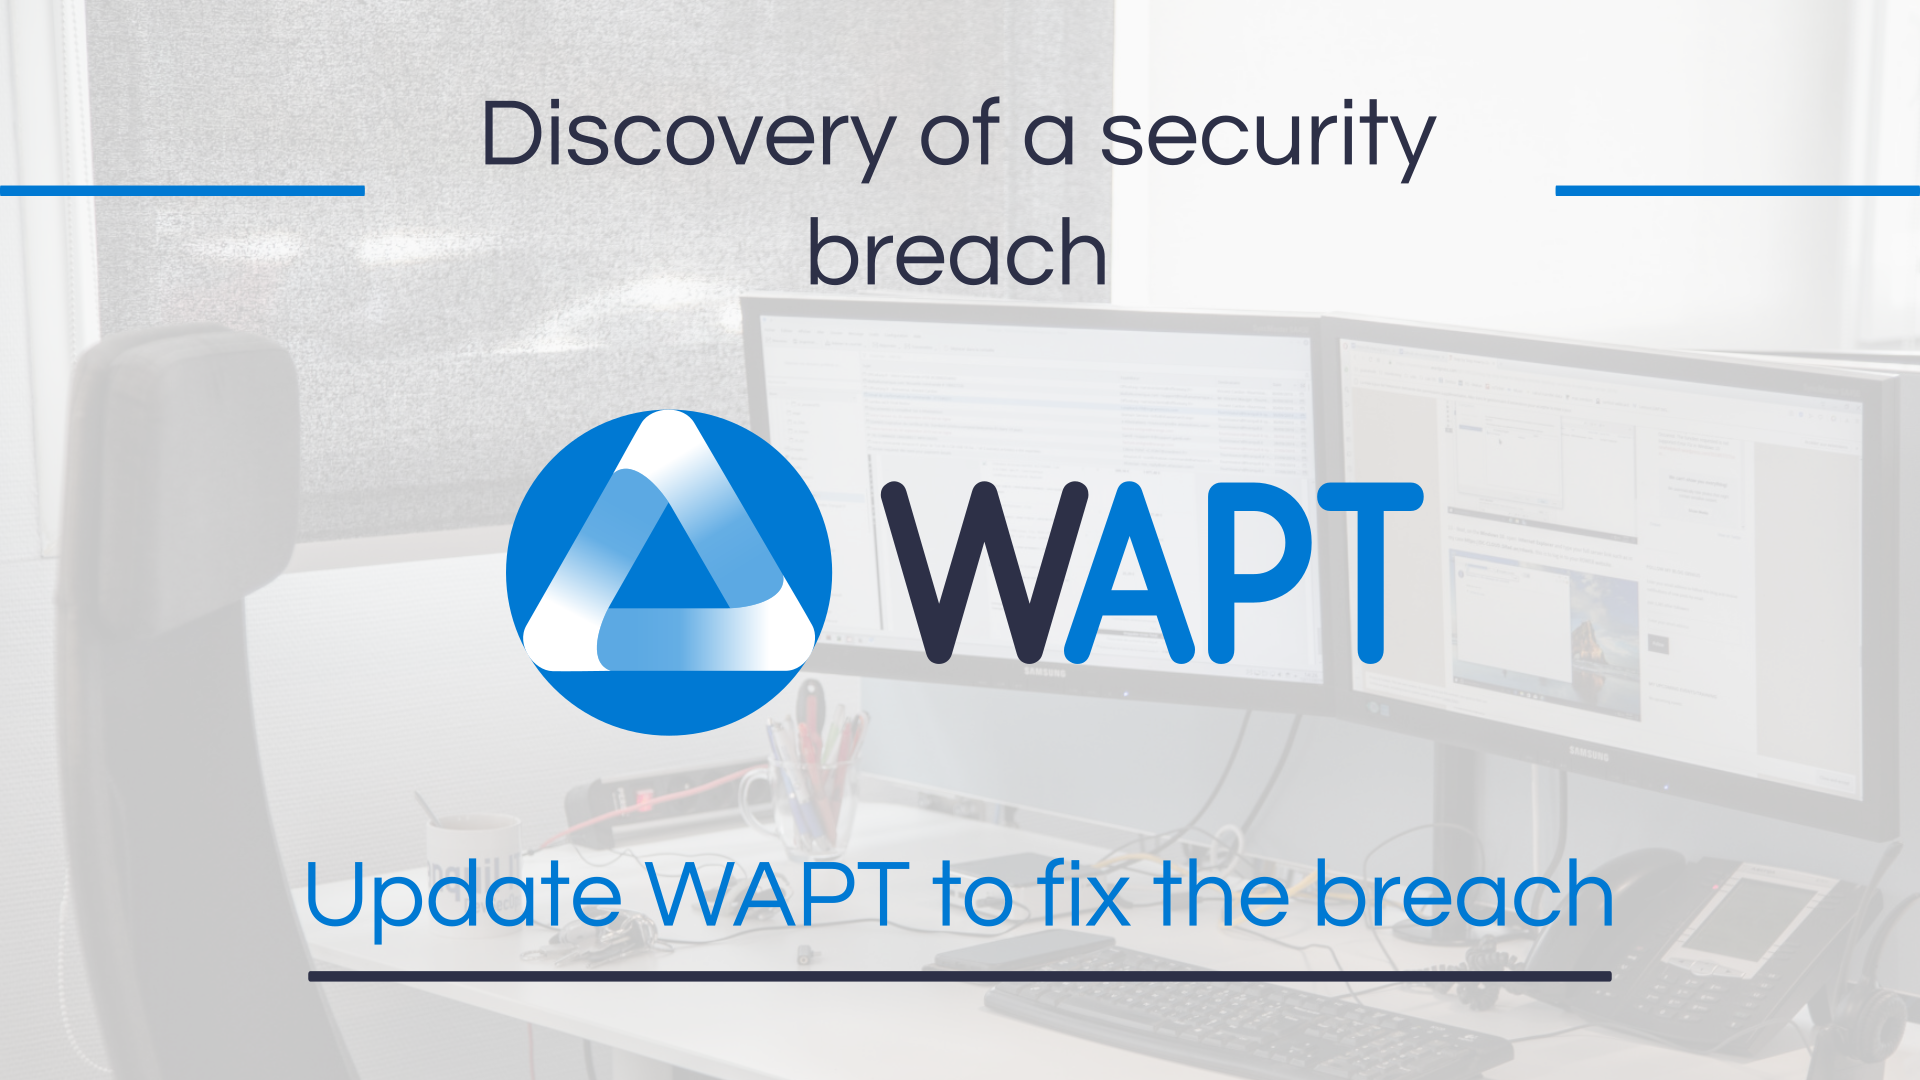 WAPT : Discovery of a security breach